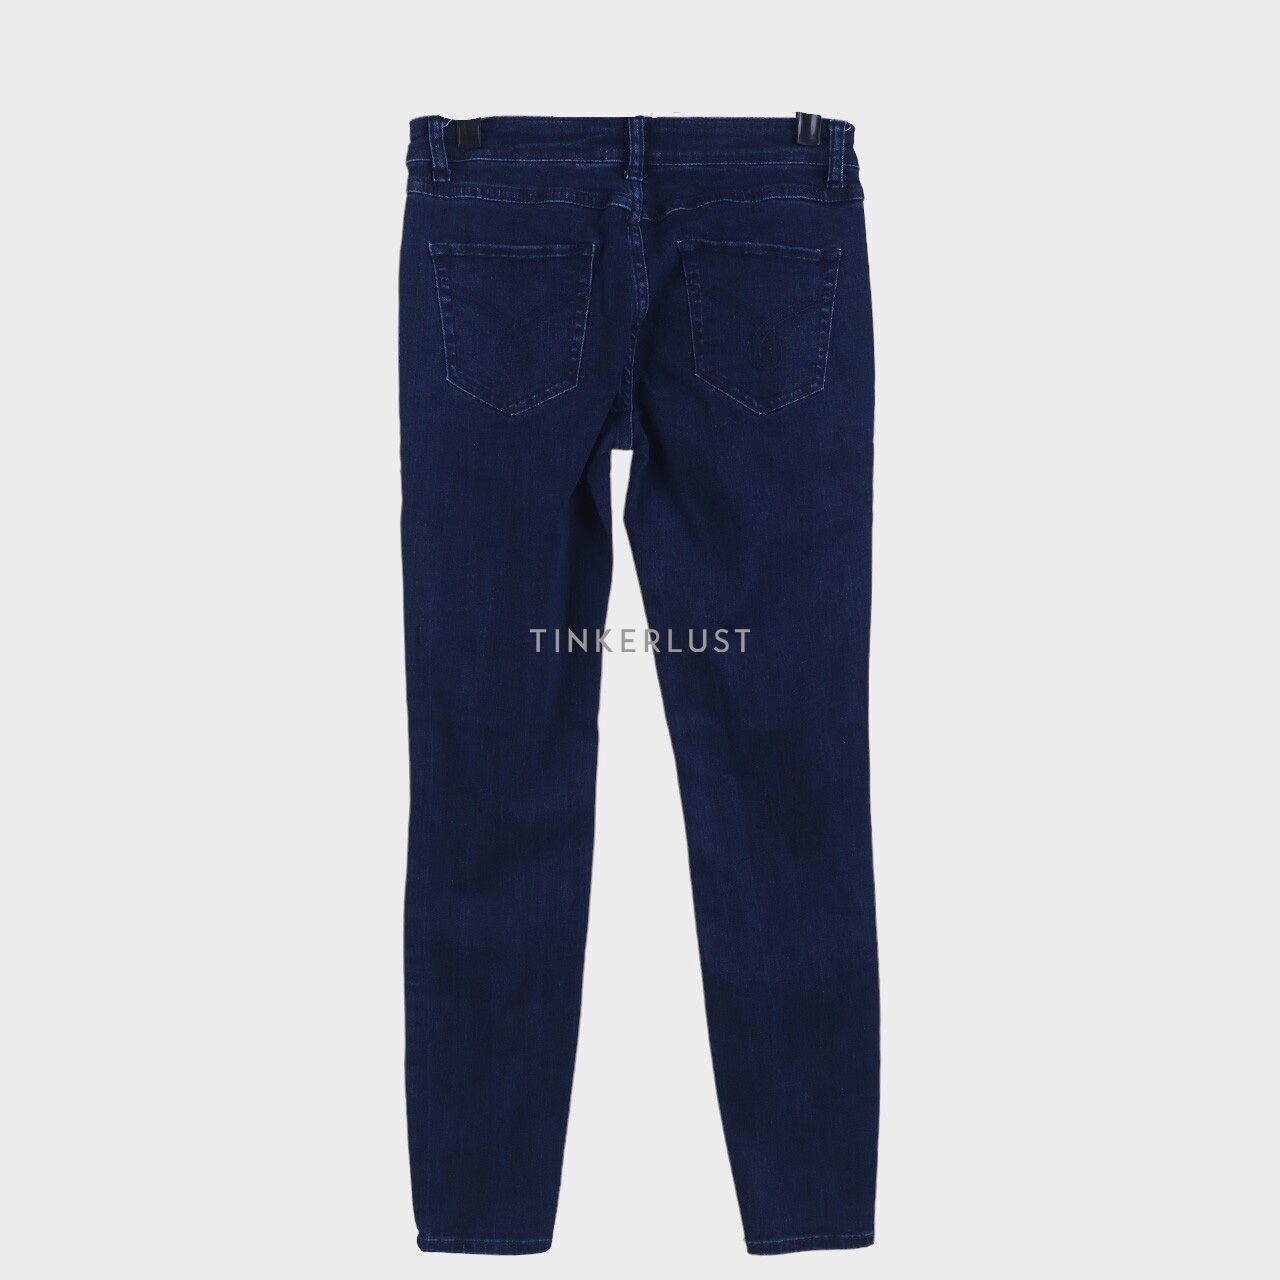 Giordano Dark Blue Mid Rise Slim Tapered Jeans Long Pants